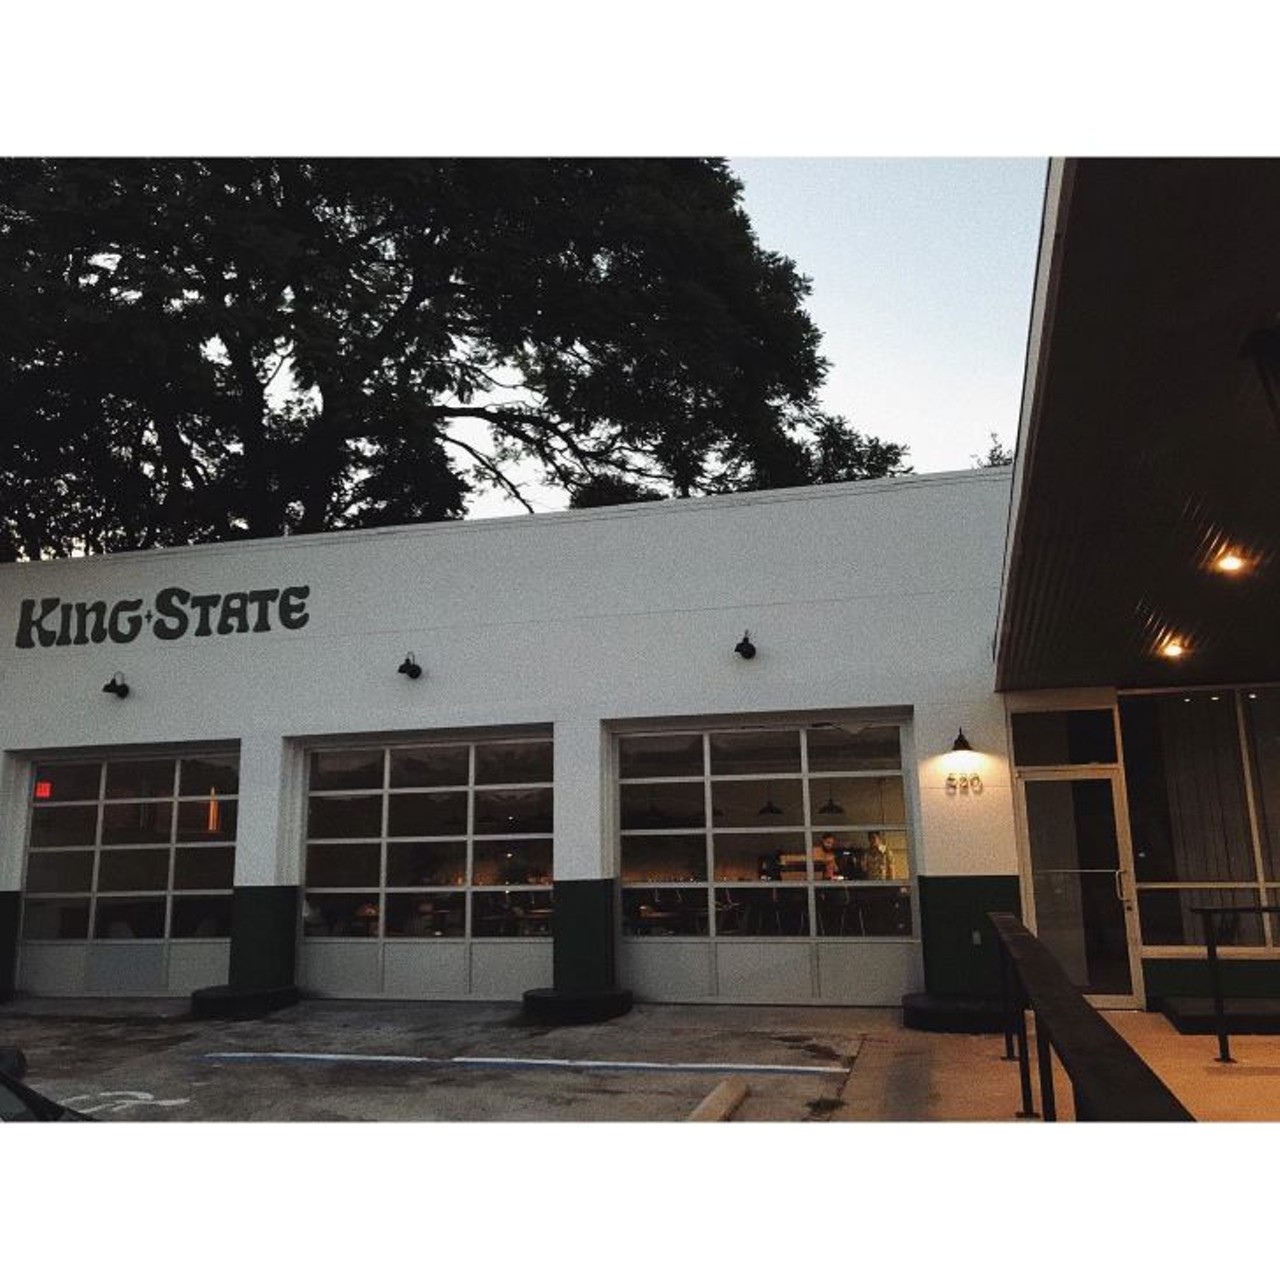 King State
(813) 221-2100. king-state.com  
King State&#146;s Tampa bar is still fulfilling online and over-the-phone orders, so you can still grab a growler or two of the brewery&#146;s in-house beer. Otherwise, you can also pick up cans or bottles of domestic and import brews. If you&#146;re already stocked up on quarantine booze, King State is still roasting coffee and selling sandwiches. 520 E. Floribraska Ave., Tampa.
Photo via King State/Facebook